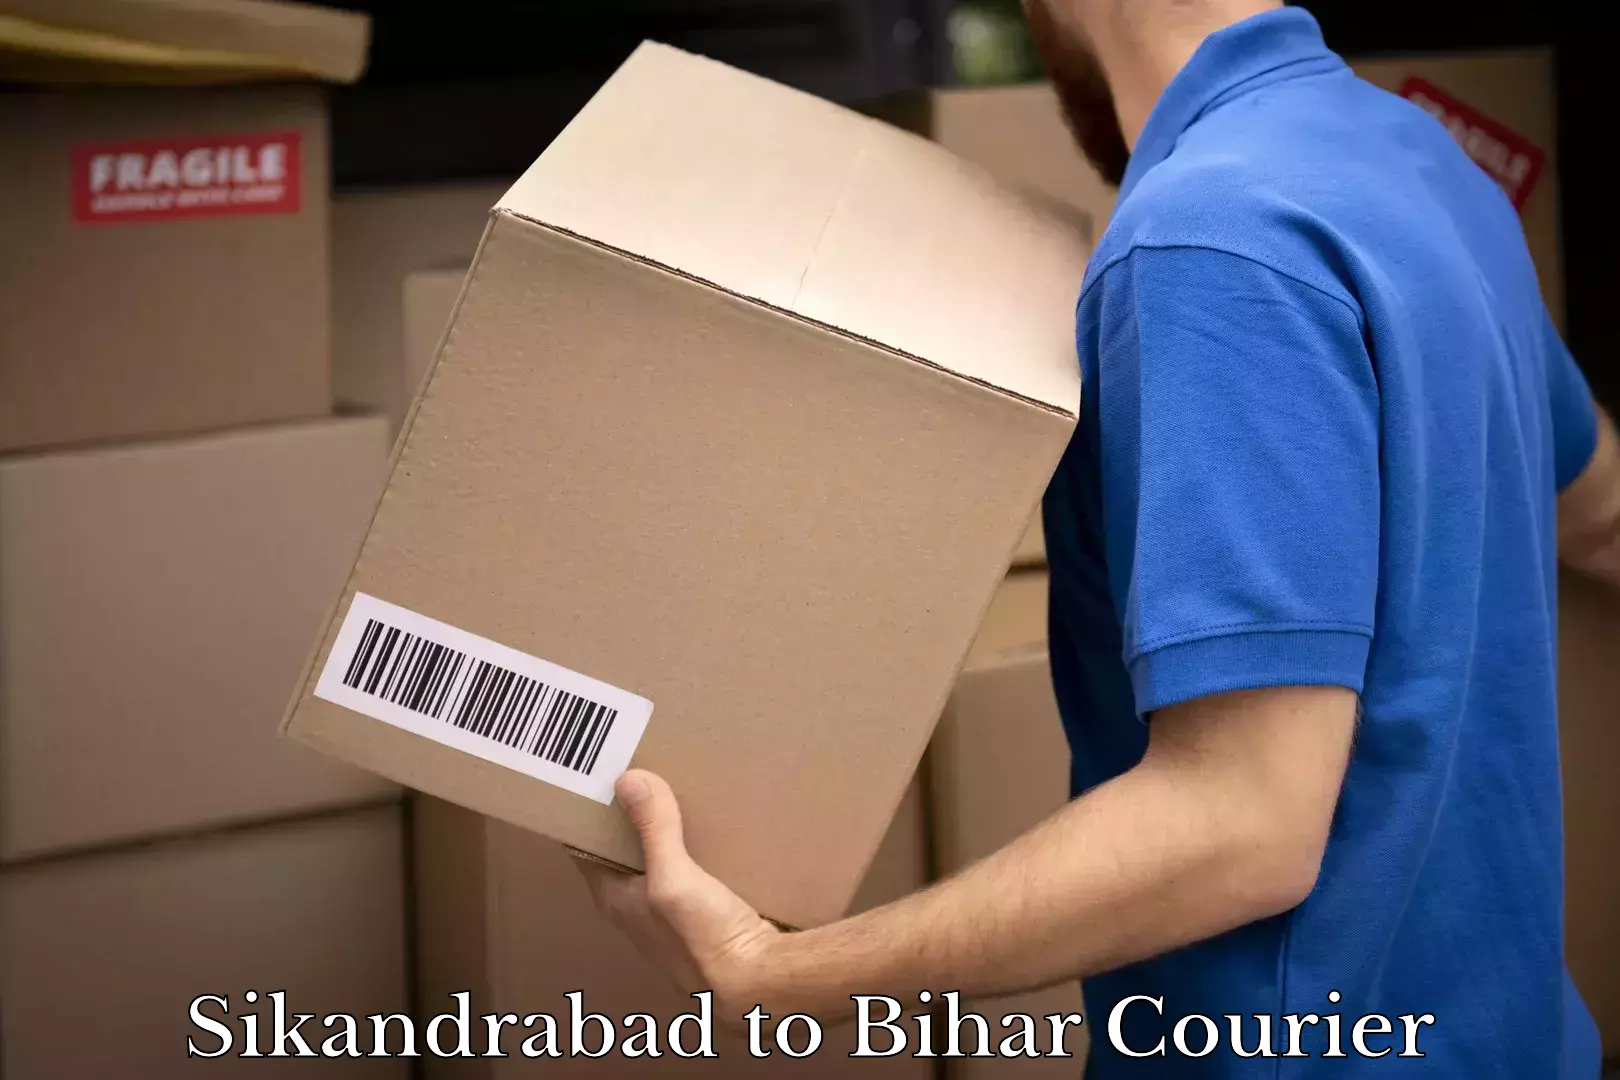 Courier service efficiency Sikandrabad to Bihar